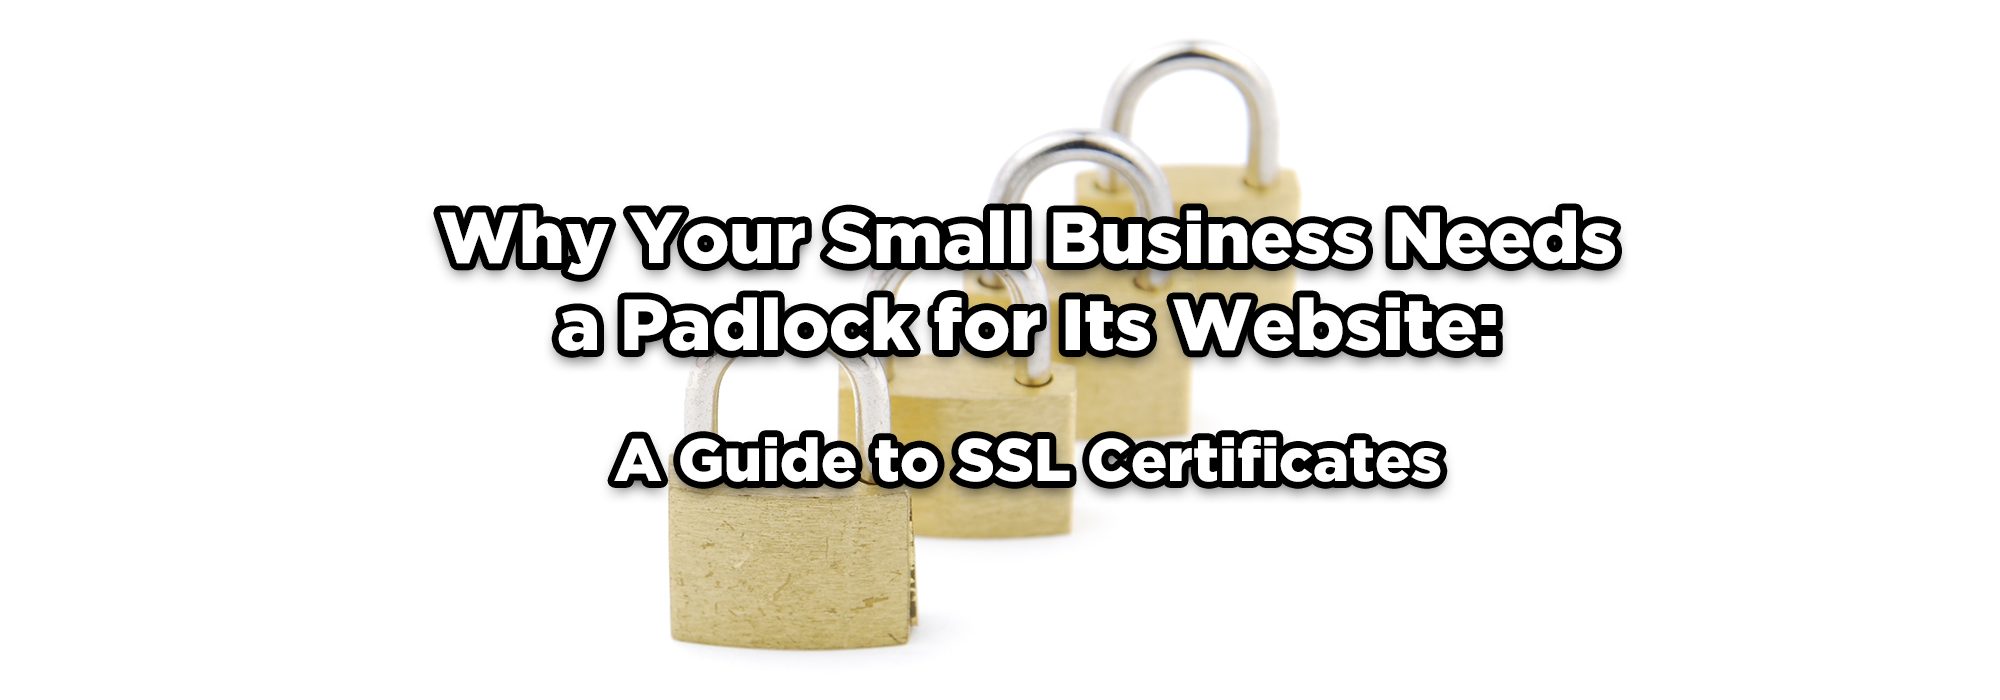 test: why your small business needs a padlock for its website: a guide to SSL certificates. Photo in background - 4 padlocks.